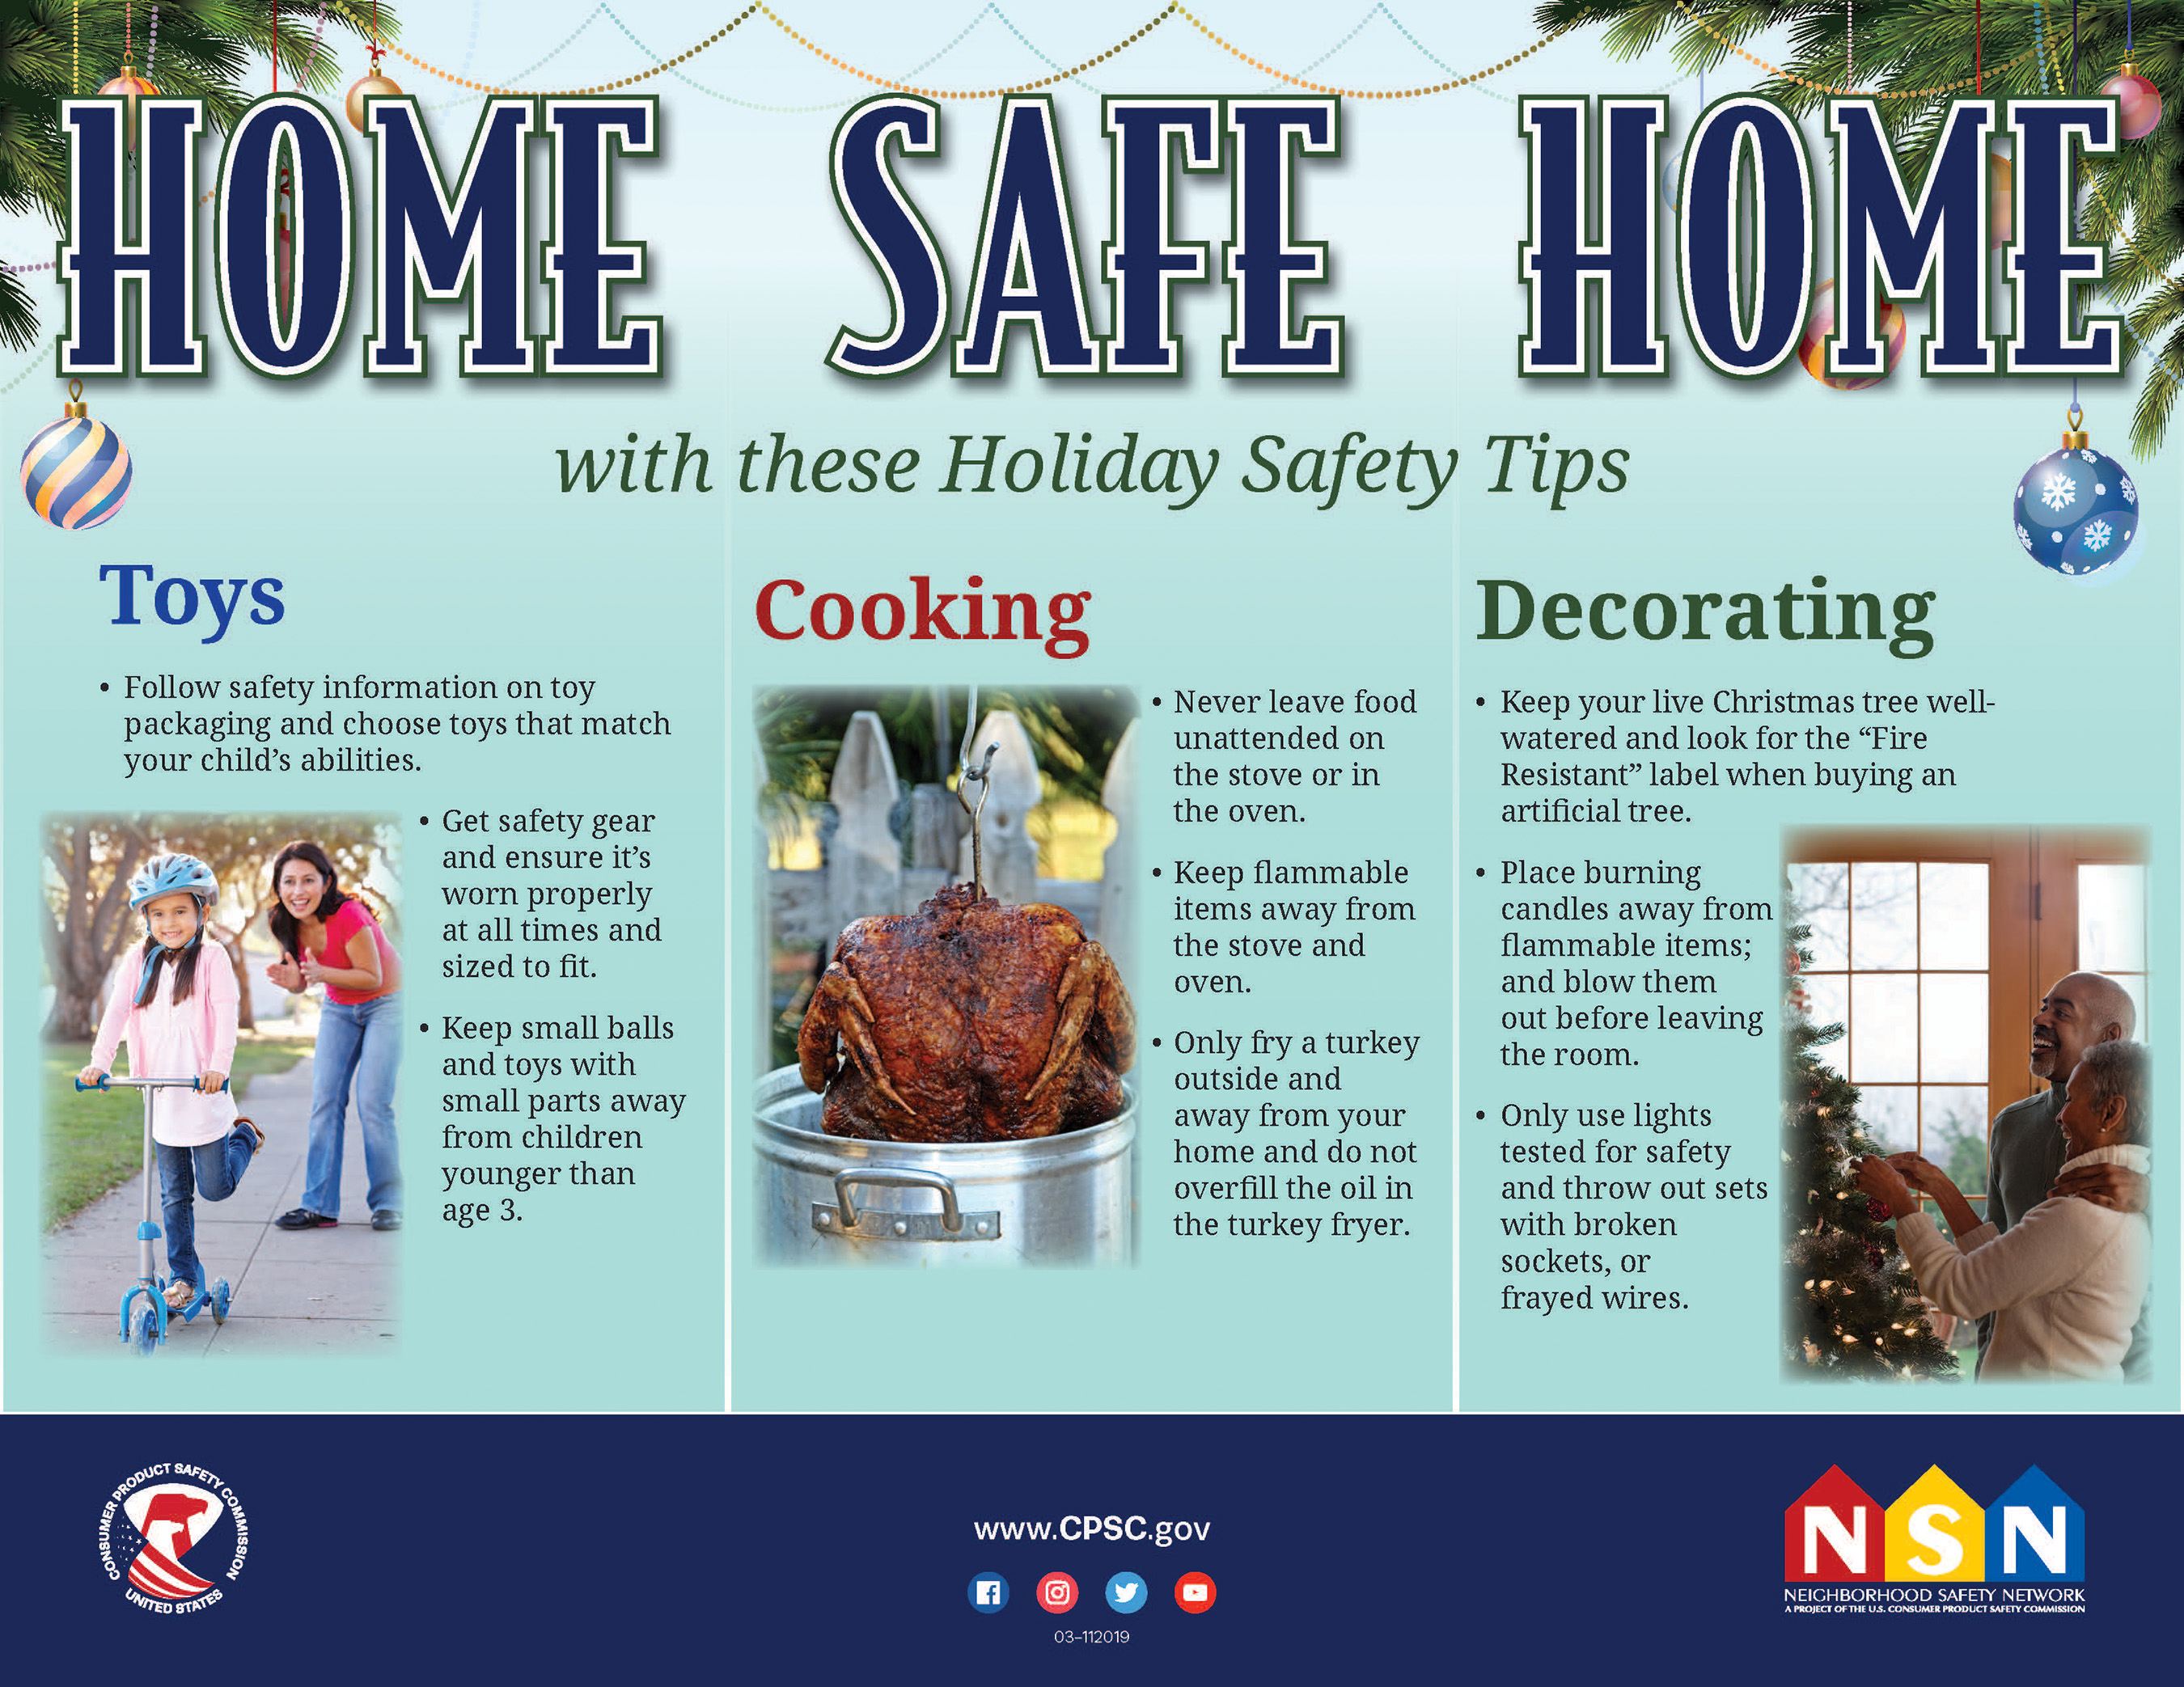 Home Safe Home with these holiday safety tips